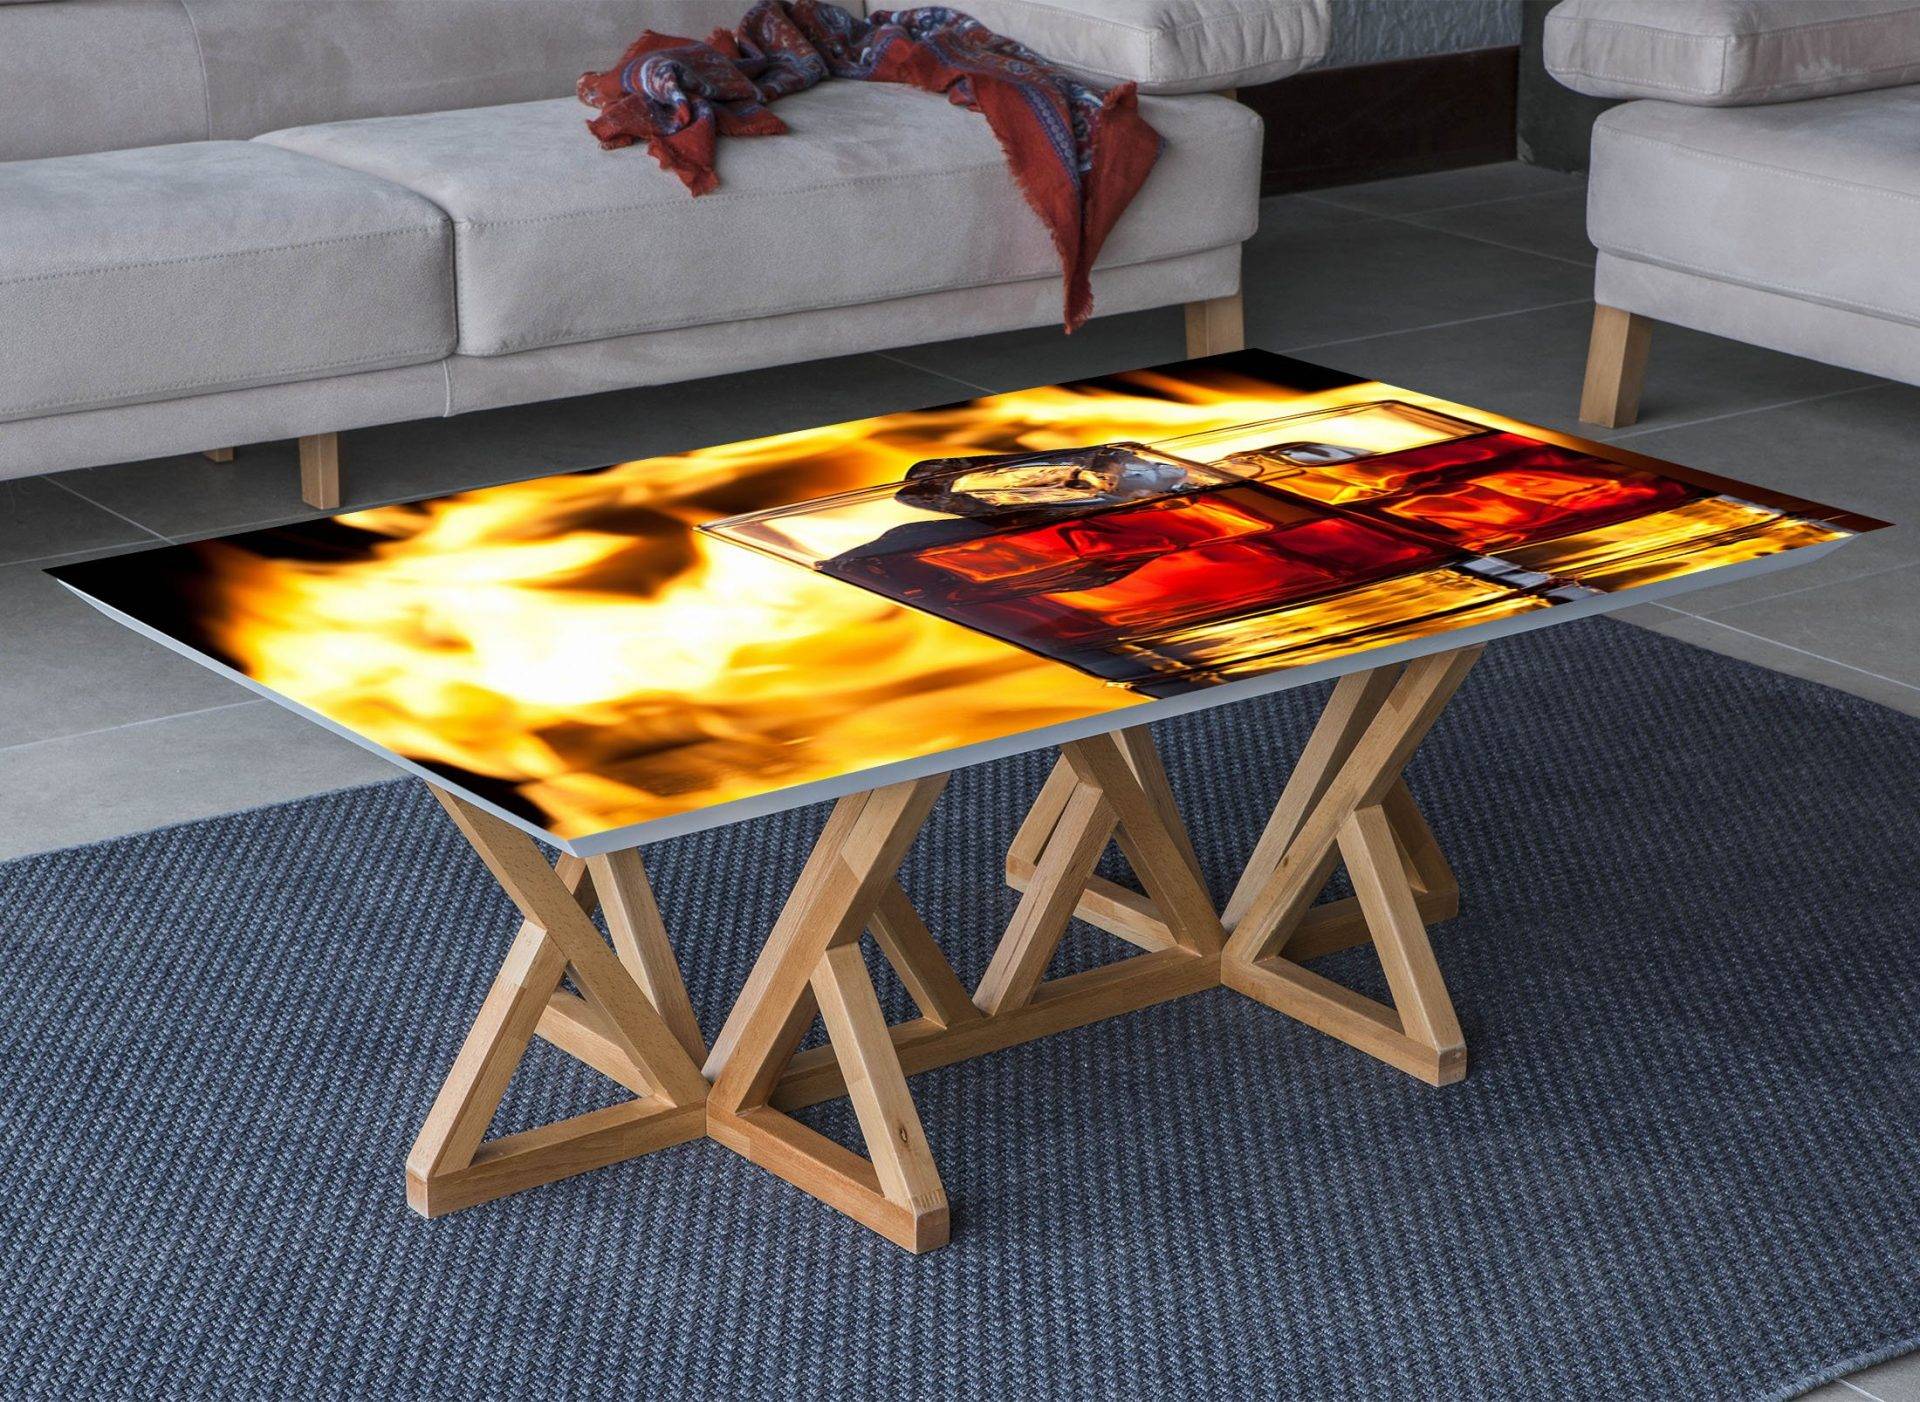 Whiskey Drink in Fire Laminated Vinyl Cover Self-Adhesive for Desk and Tables